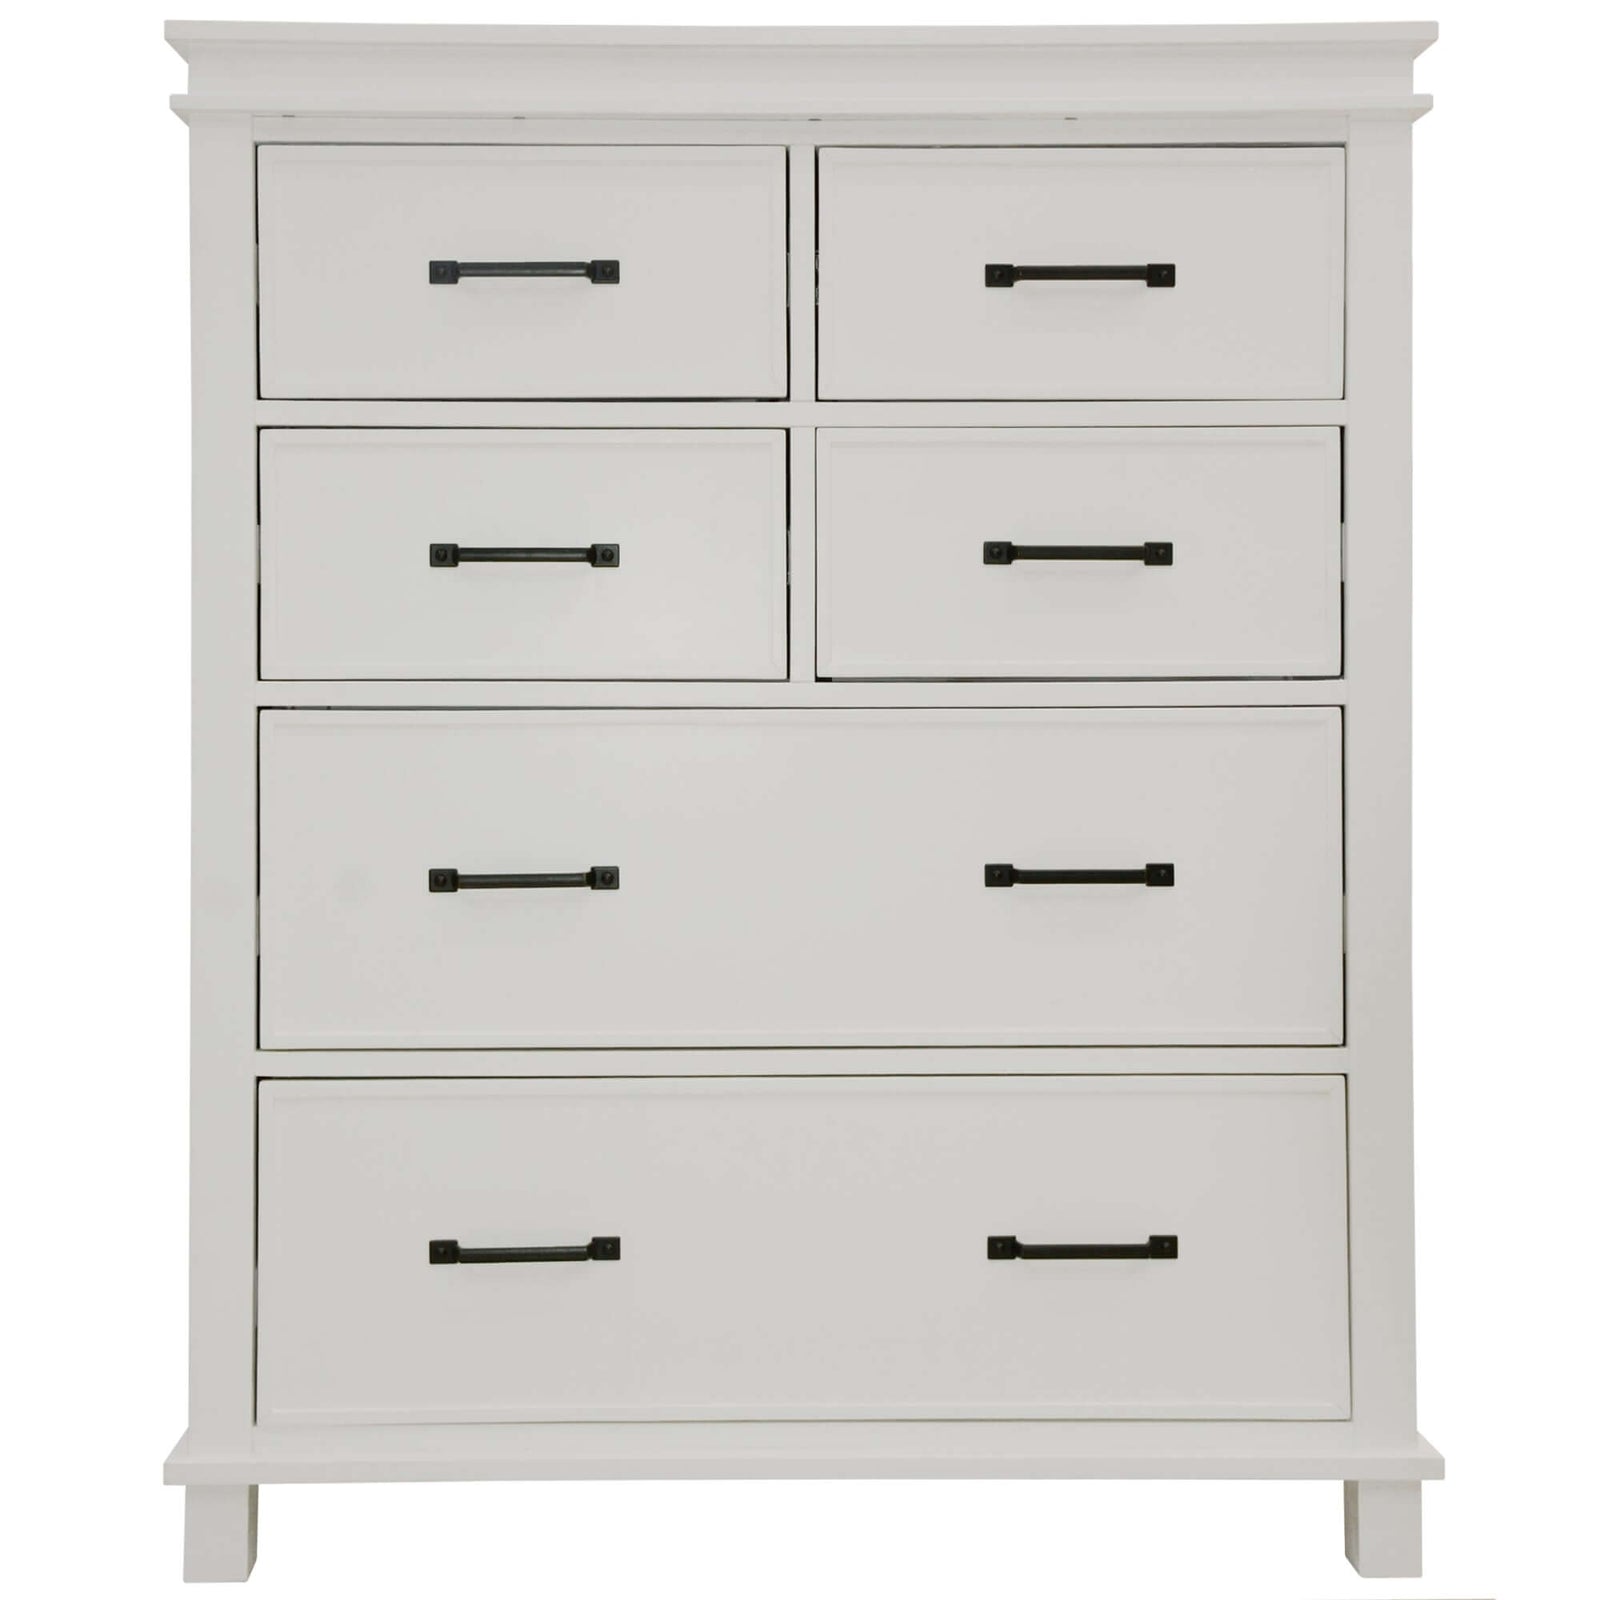 Lily Tallboy 6-Drawer Chest - Solid Pine Wood - White-Upinteriors